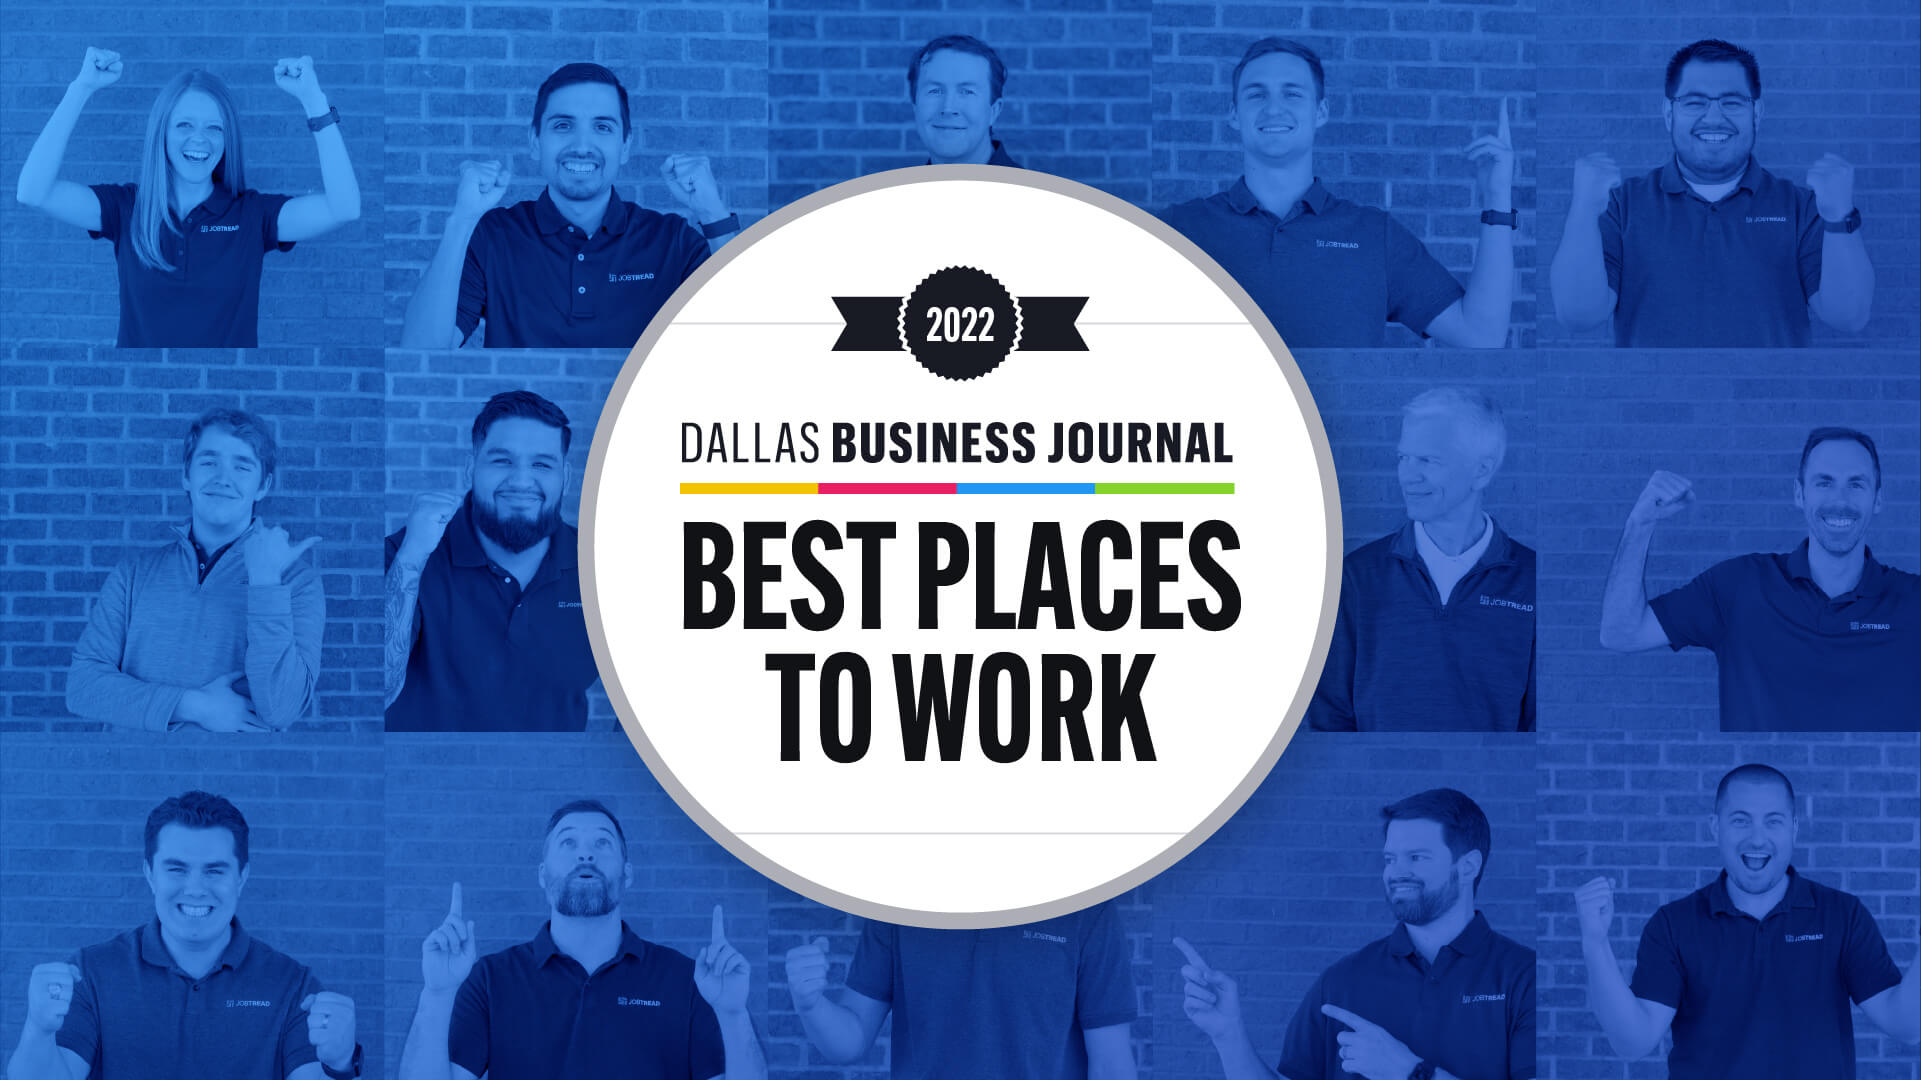 JobTread Software Ranked 2 Best Place to Work by the Dallas Business